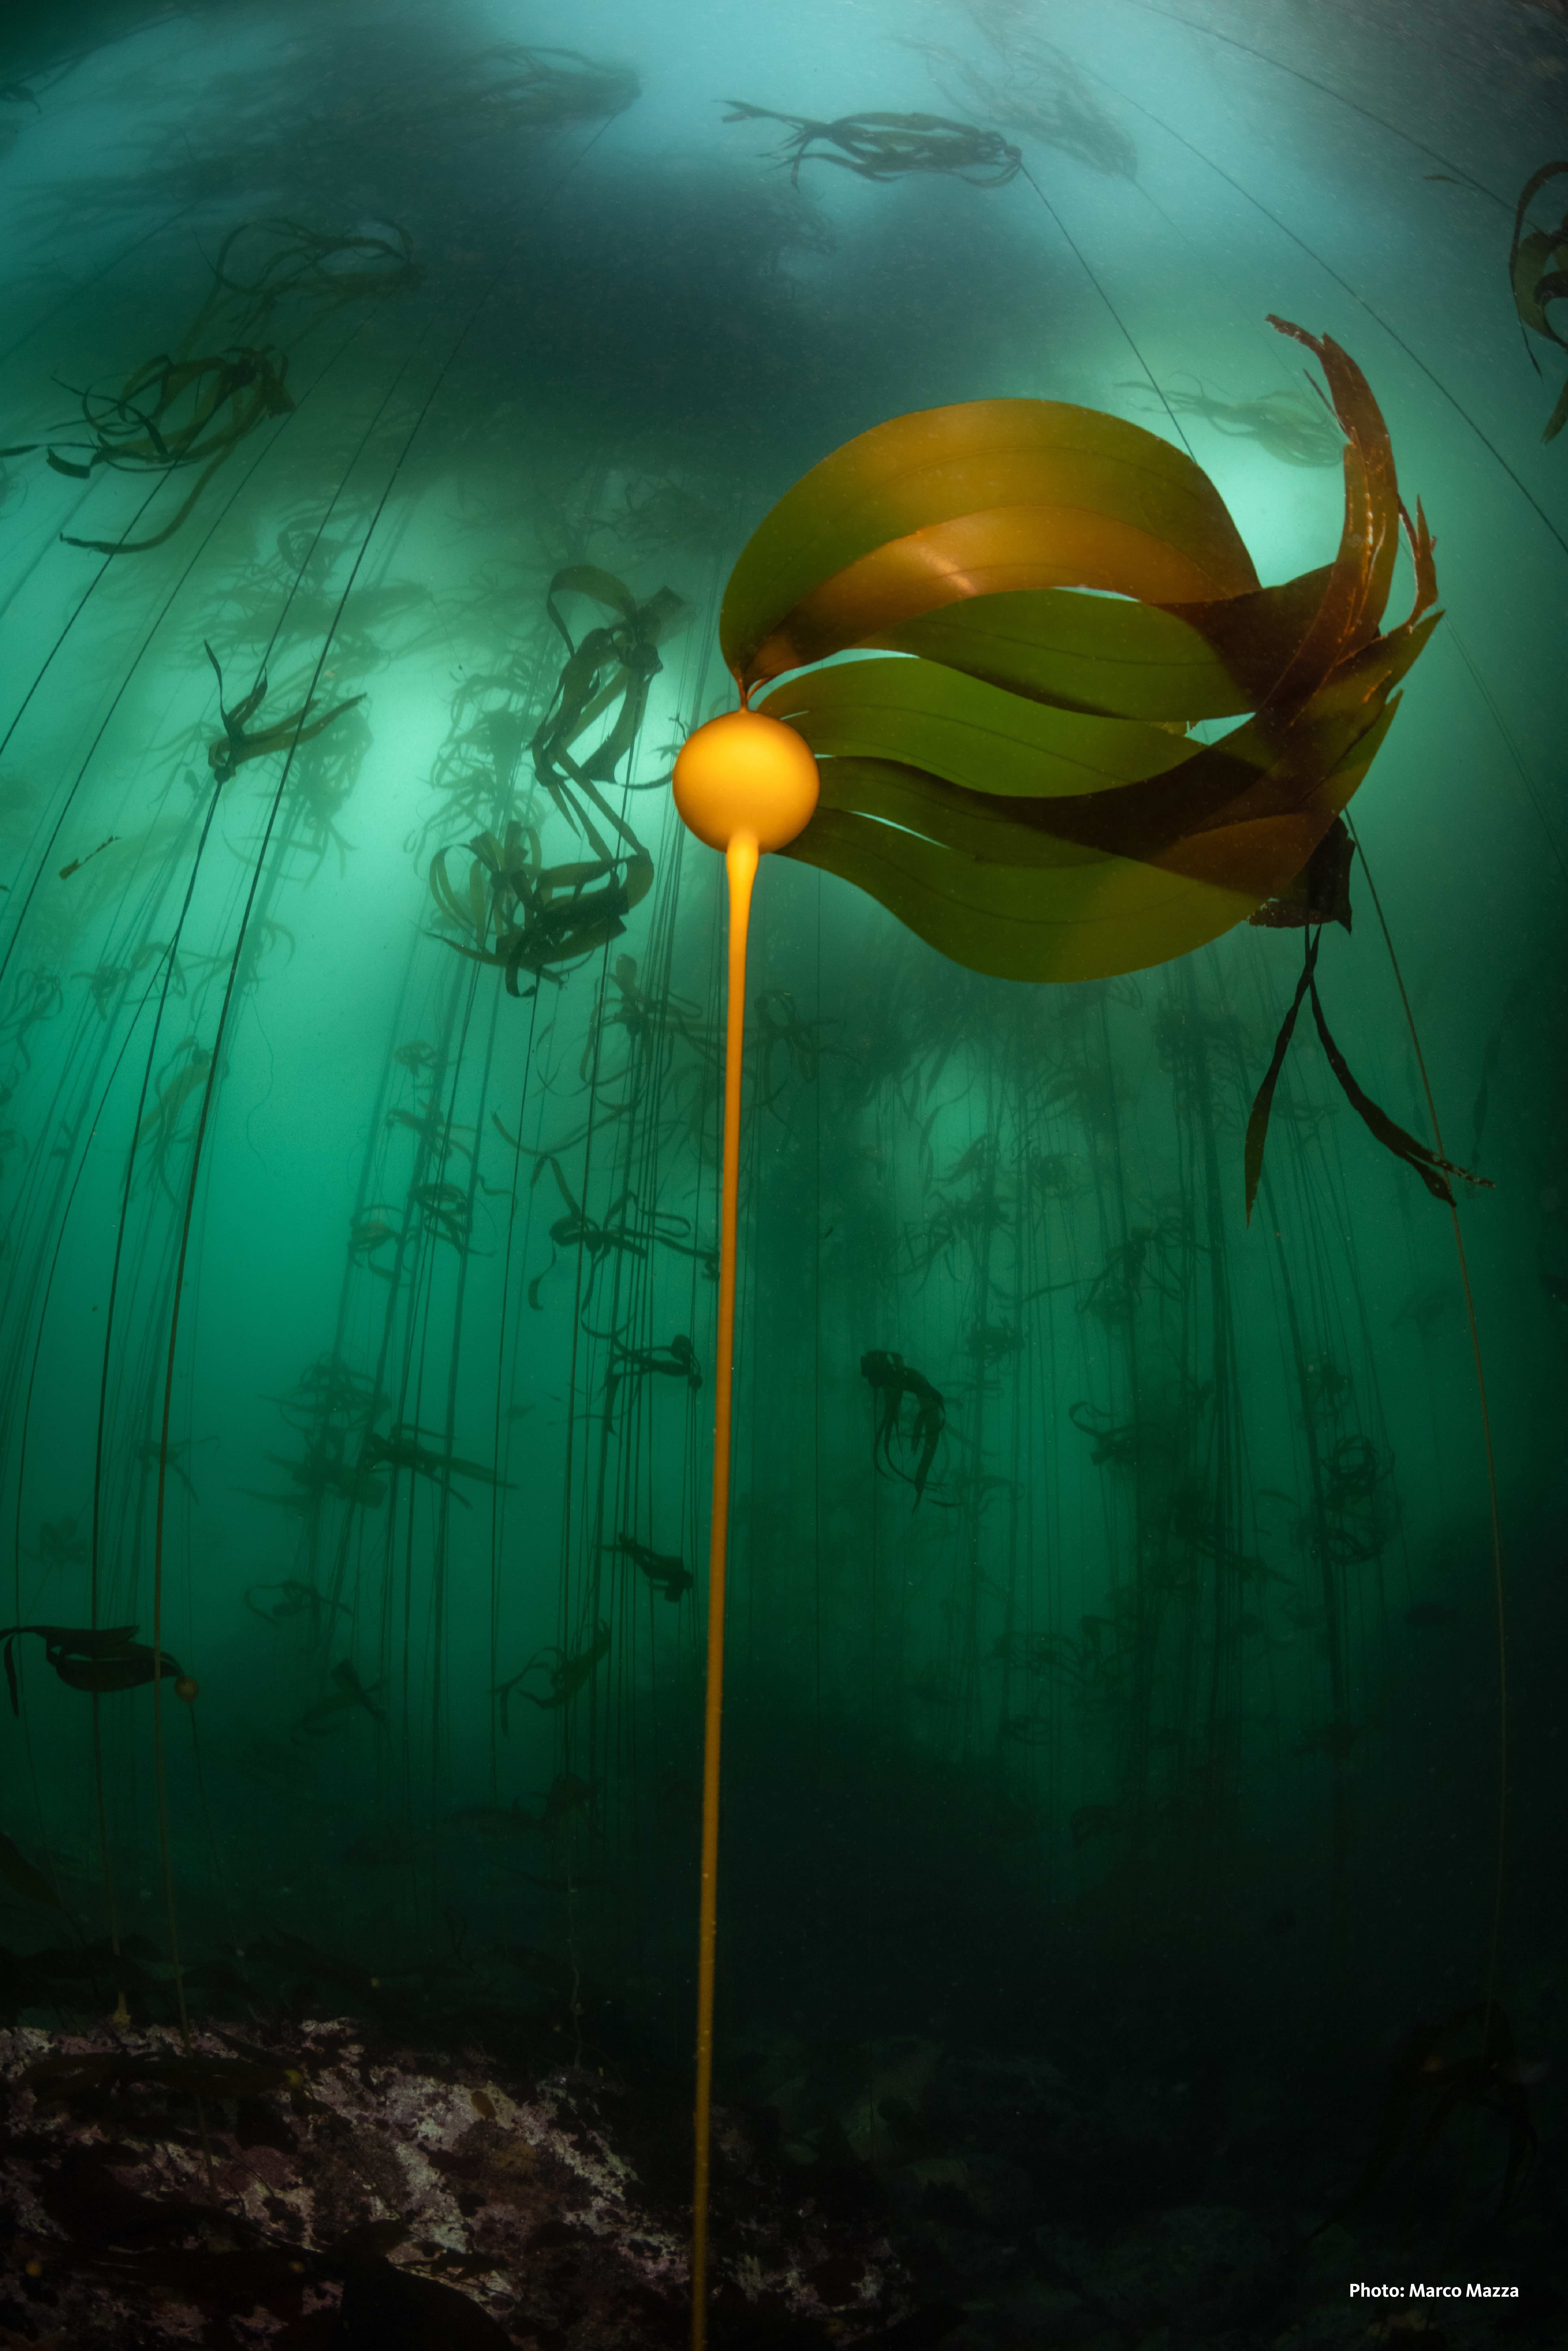 Photo of a kelp forest taken underwater. Photo by Marco Mazza